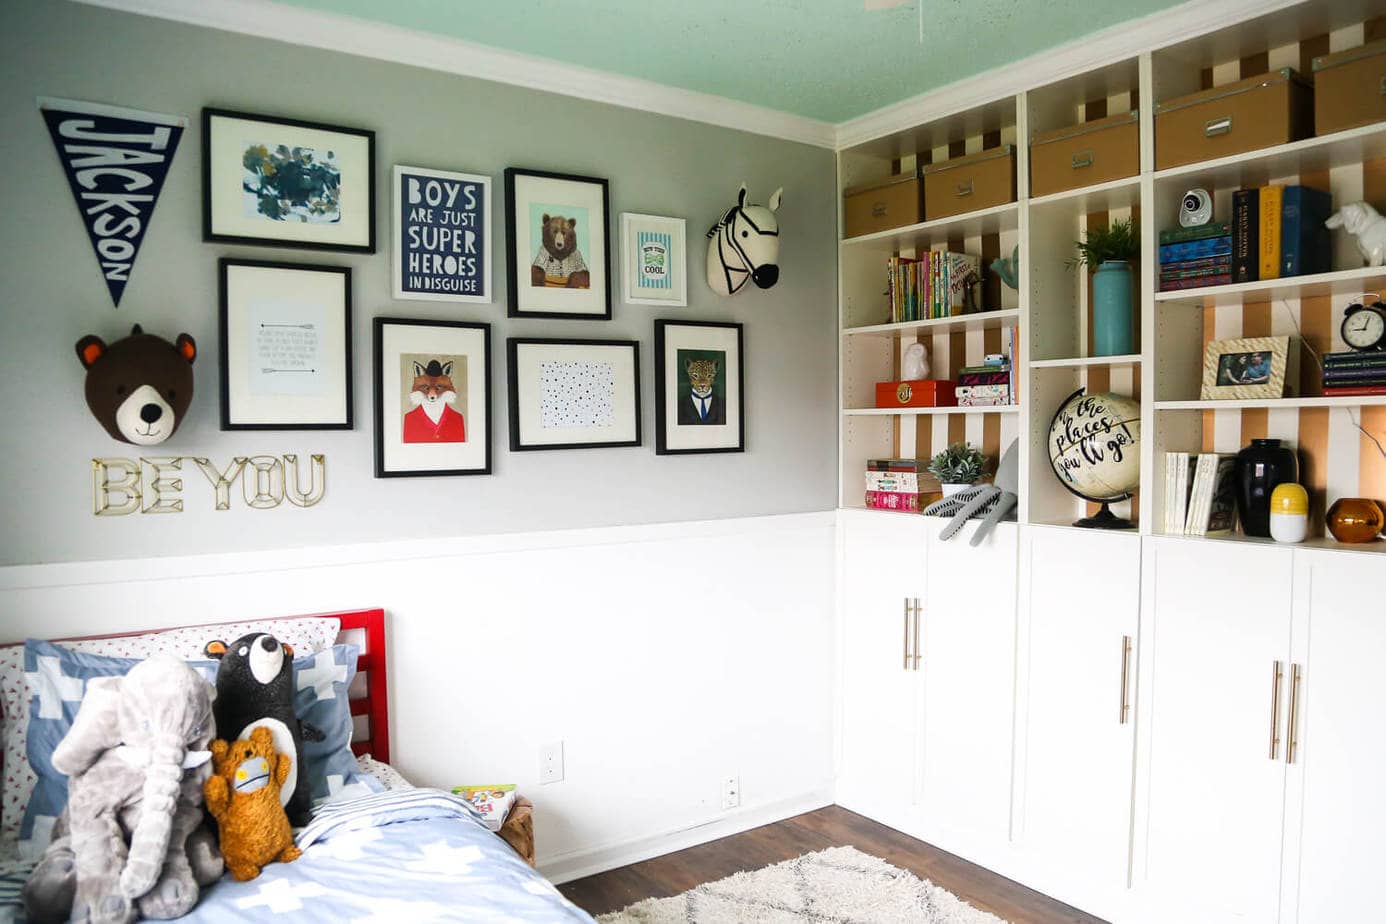 An adorable, colofrful gender-neutral big kid room. Great ideas for how to decorate a room for your toddler or preschooler.